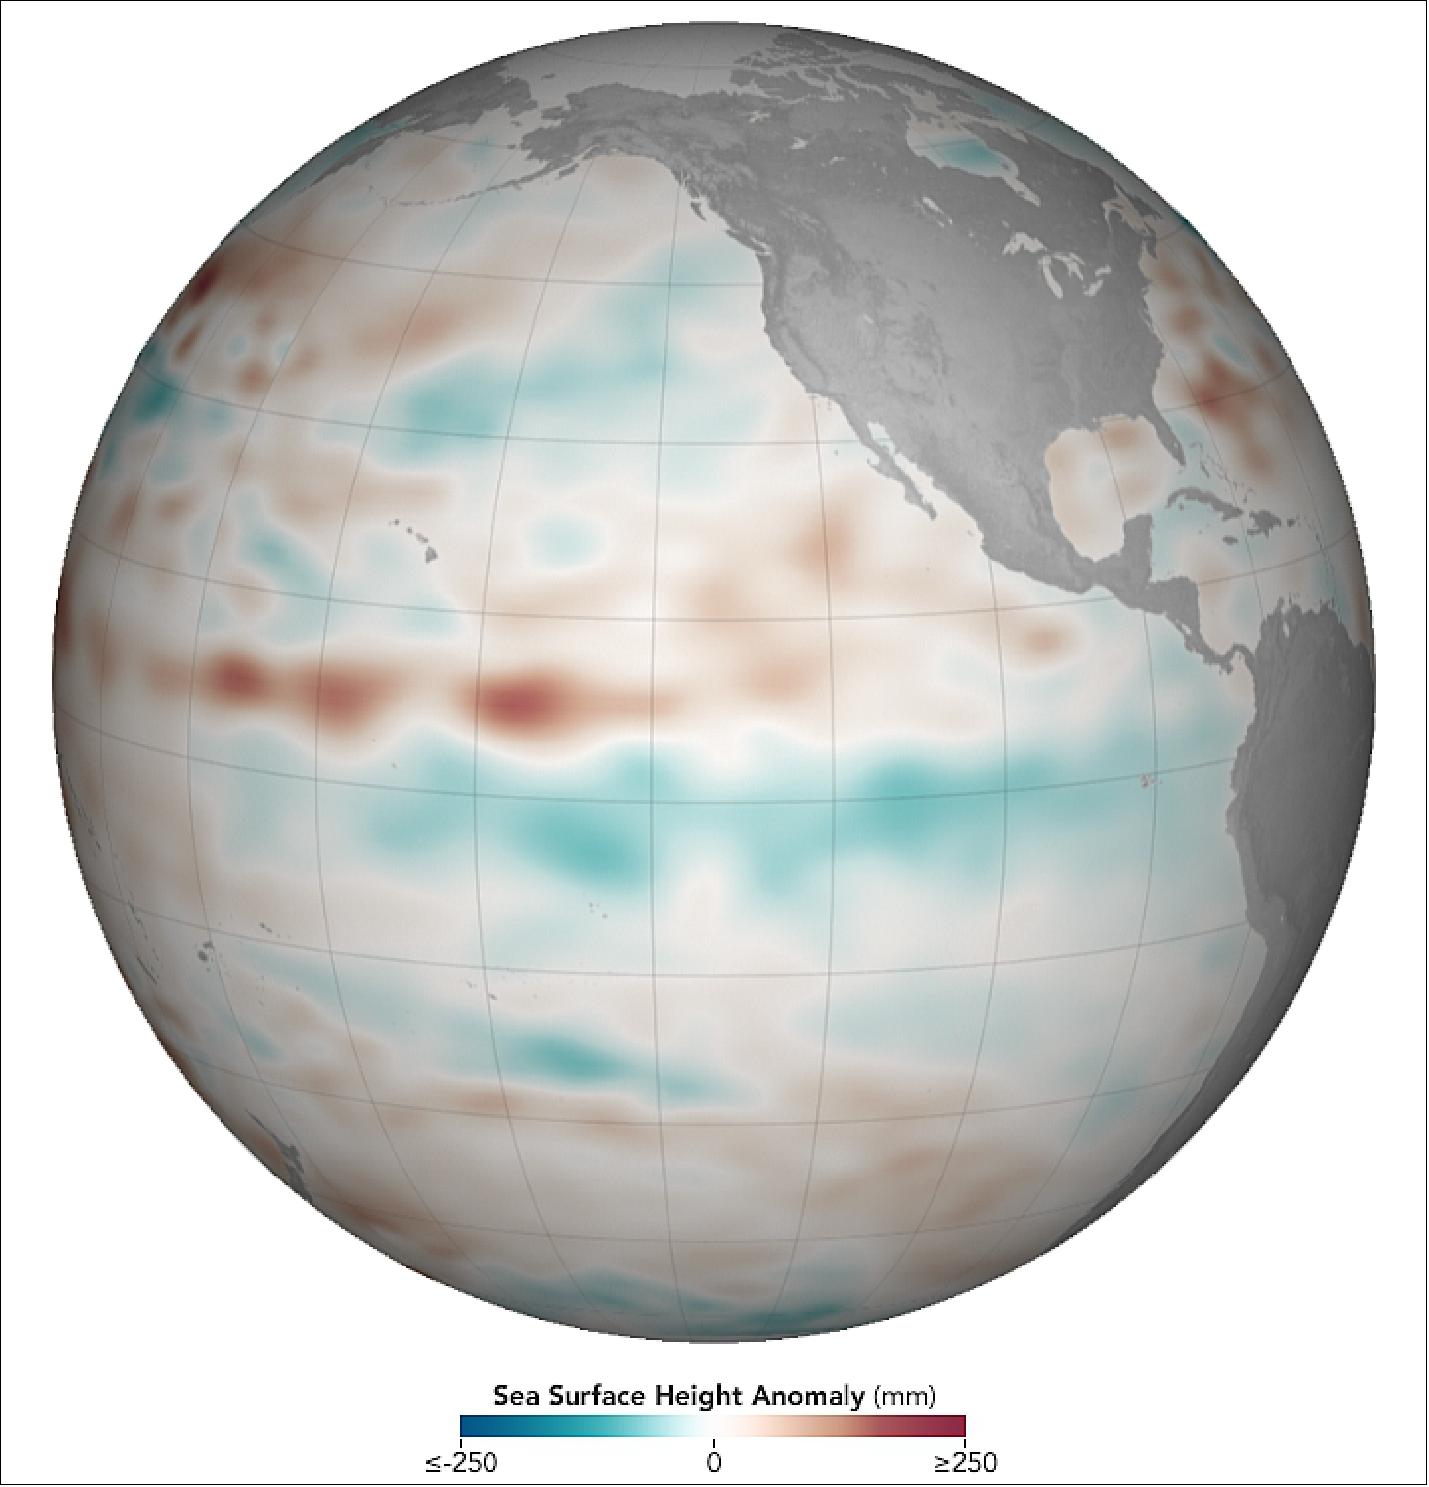 Figure 14: The Pacific sea surface height anomalies on December 7, 2017, as analyzed by NASA scientists (image credit: NASA Earth Observatory, images by Joshua Stevens, using Jason-2 and Jason-3 data provided by Akiko Kayashi and Bill Patzert, NASA/JPL Ocean Surface Topography Team, story by Michael Carlowicz)